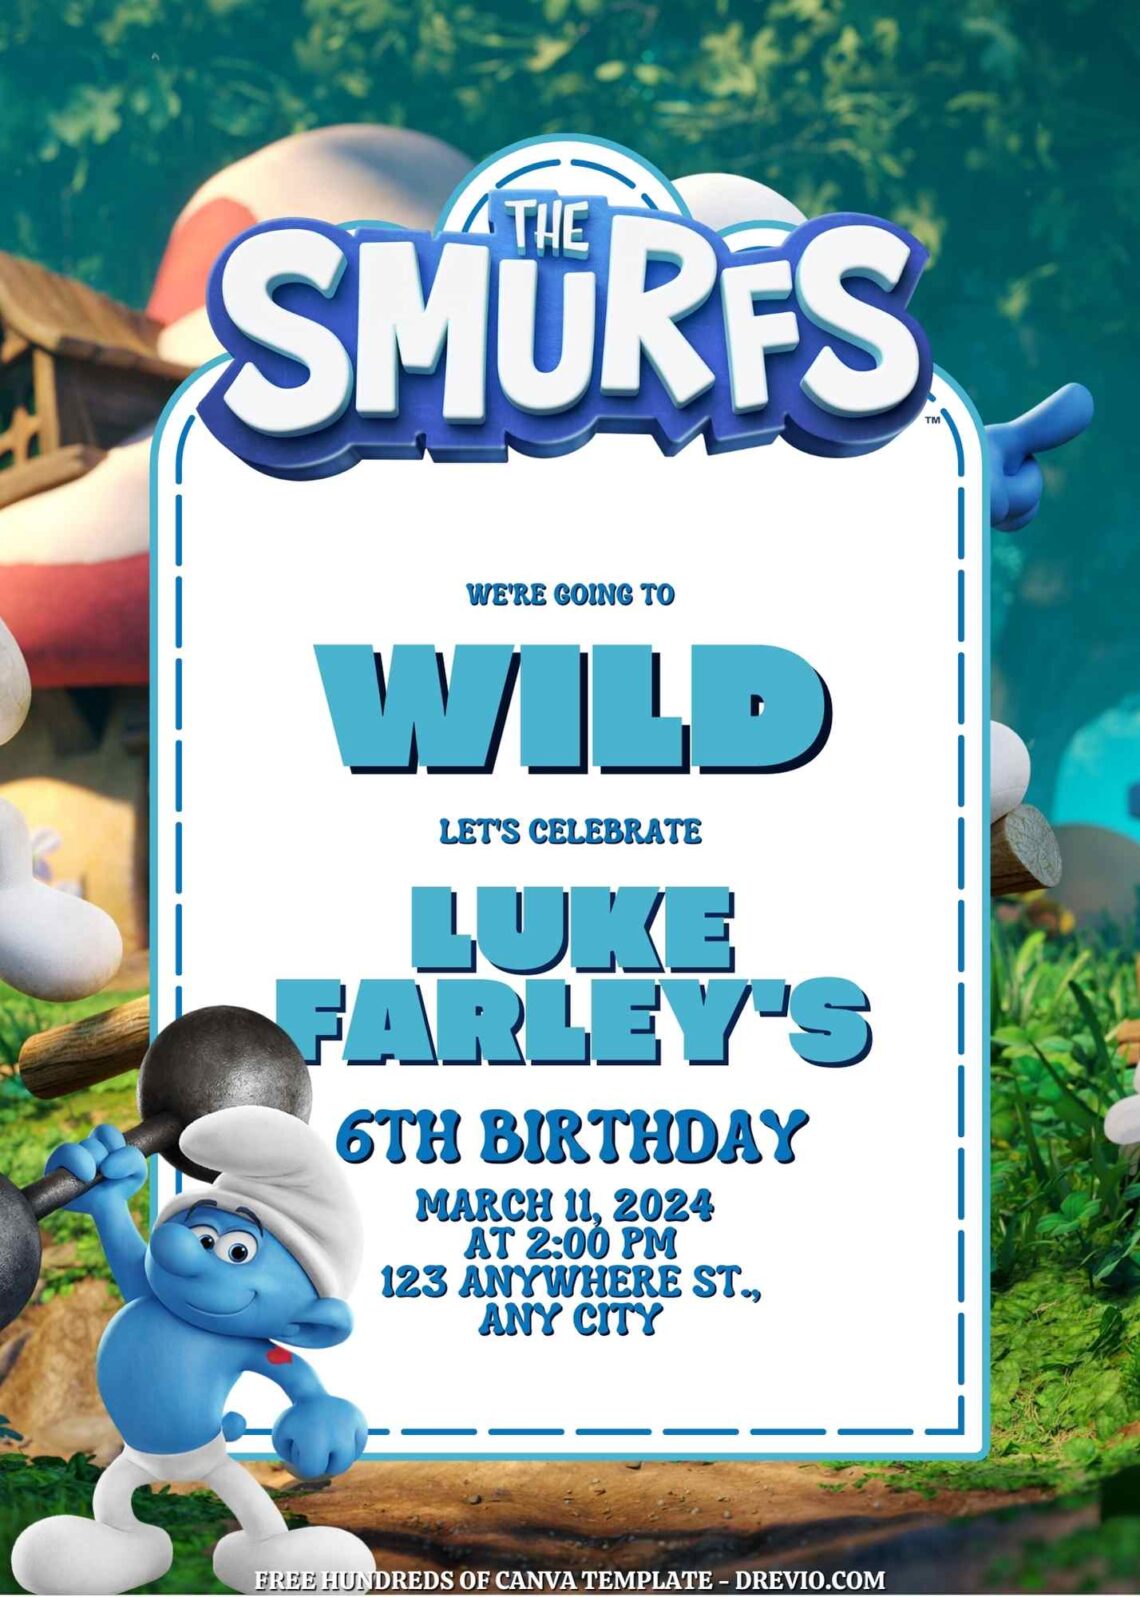 Free Smurfs Birthday Invitations with Grup in the Background